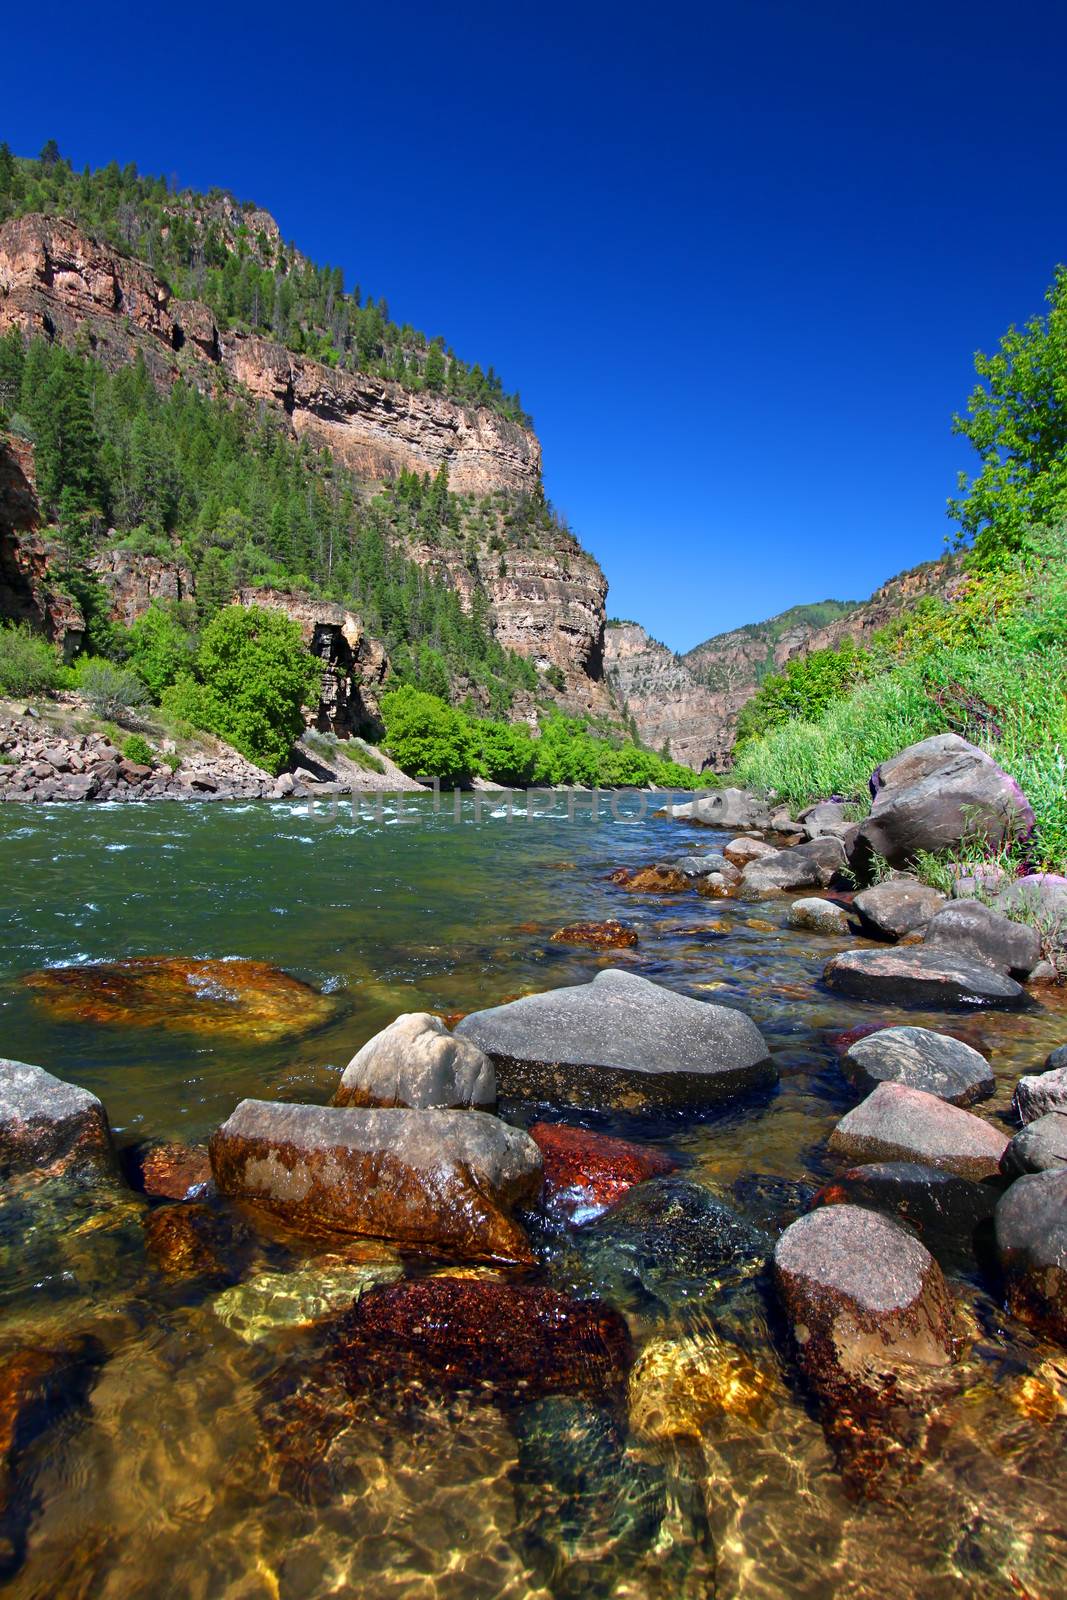 Colorado River flows through the White River National Forest in the western United States.